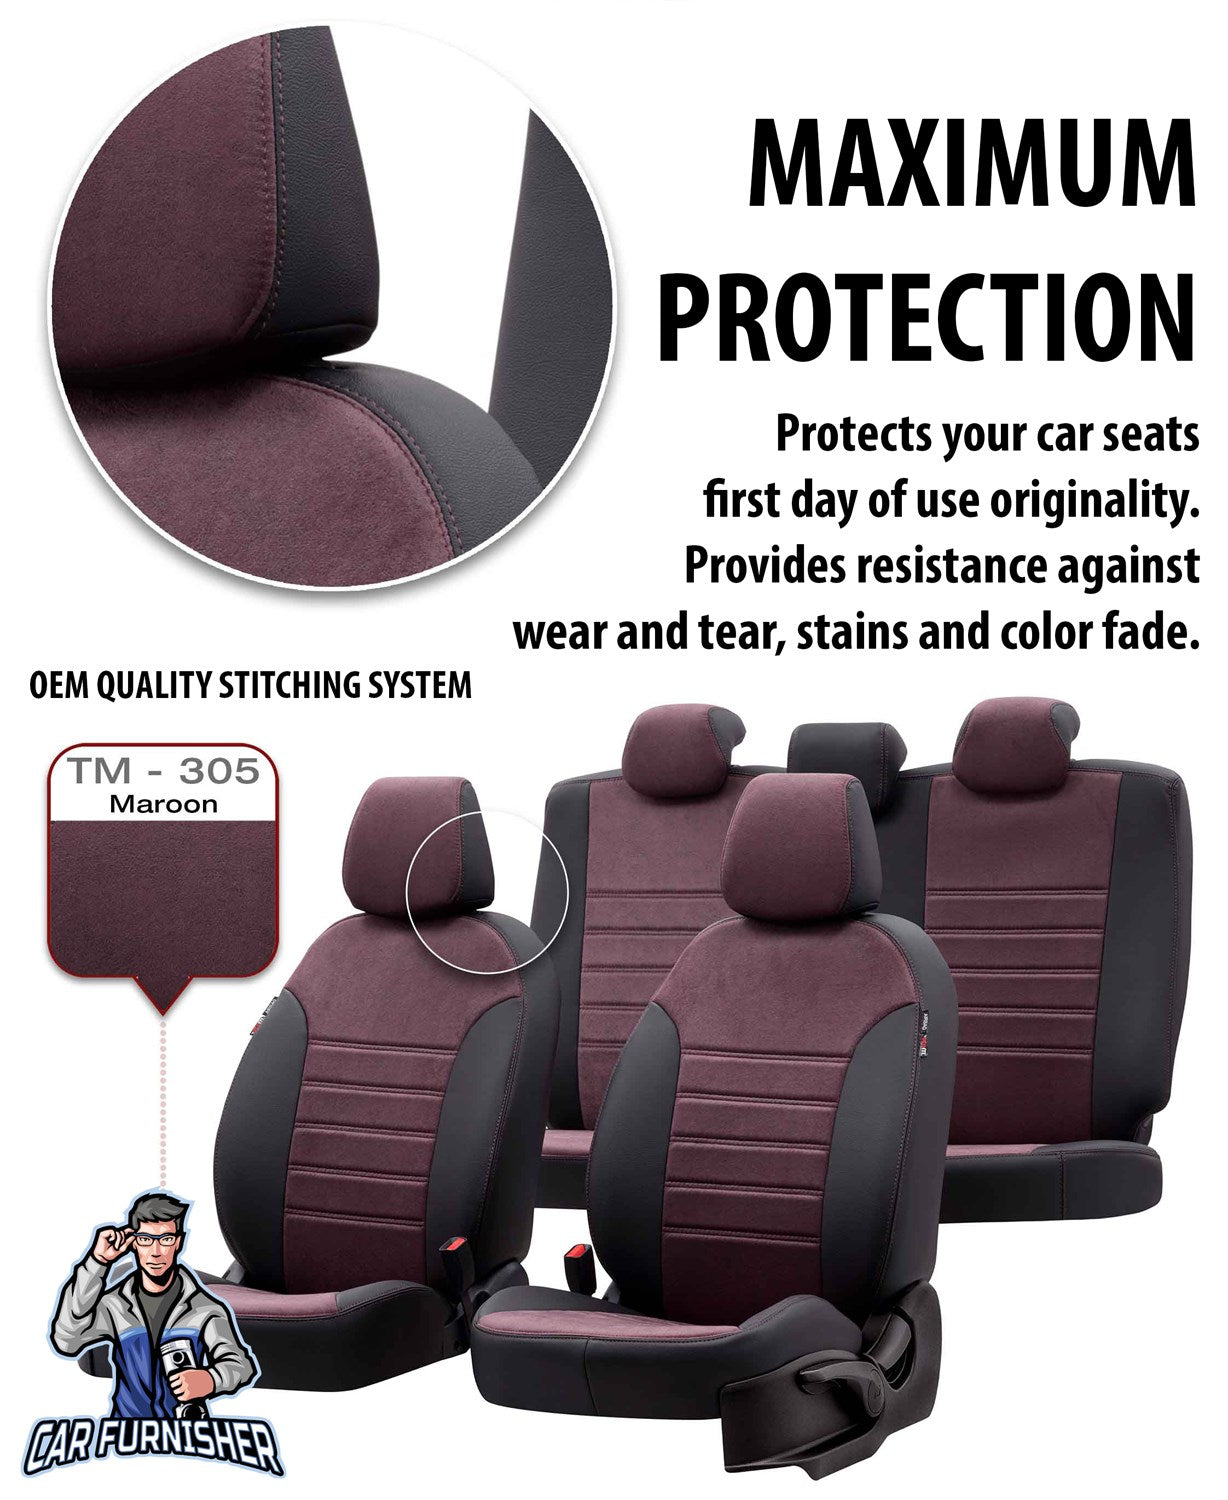 Chevrolet Spark Seat Covers Milano Suede Design Burgundy Leather & Suede Fabric